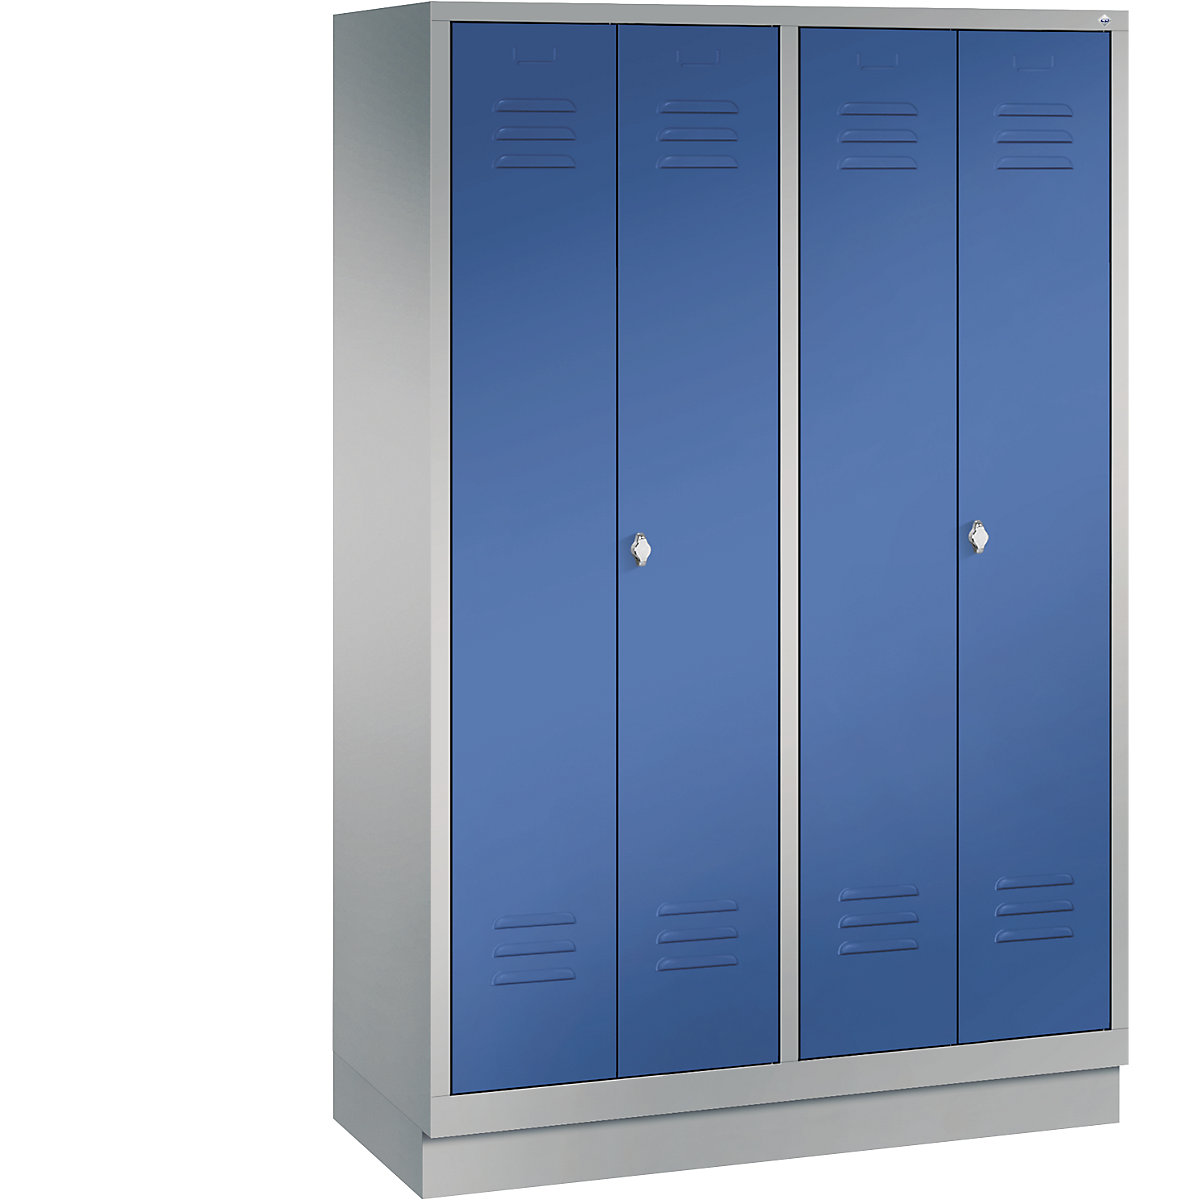 CLASSIC cloakroom locker with plinth, doors close in the middle – C+P, 4 compartments, compartment width 300 mm, white aluminium / gentian blue-12